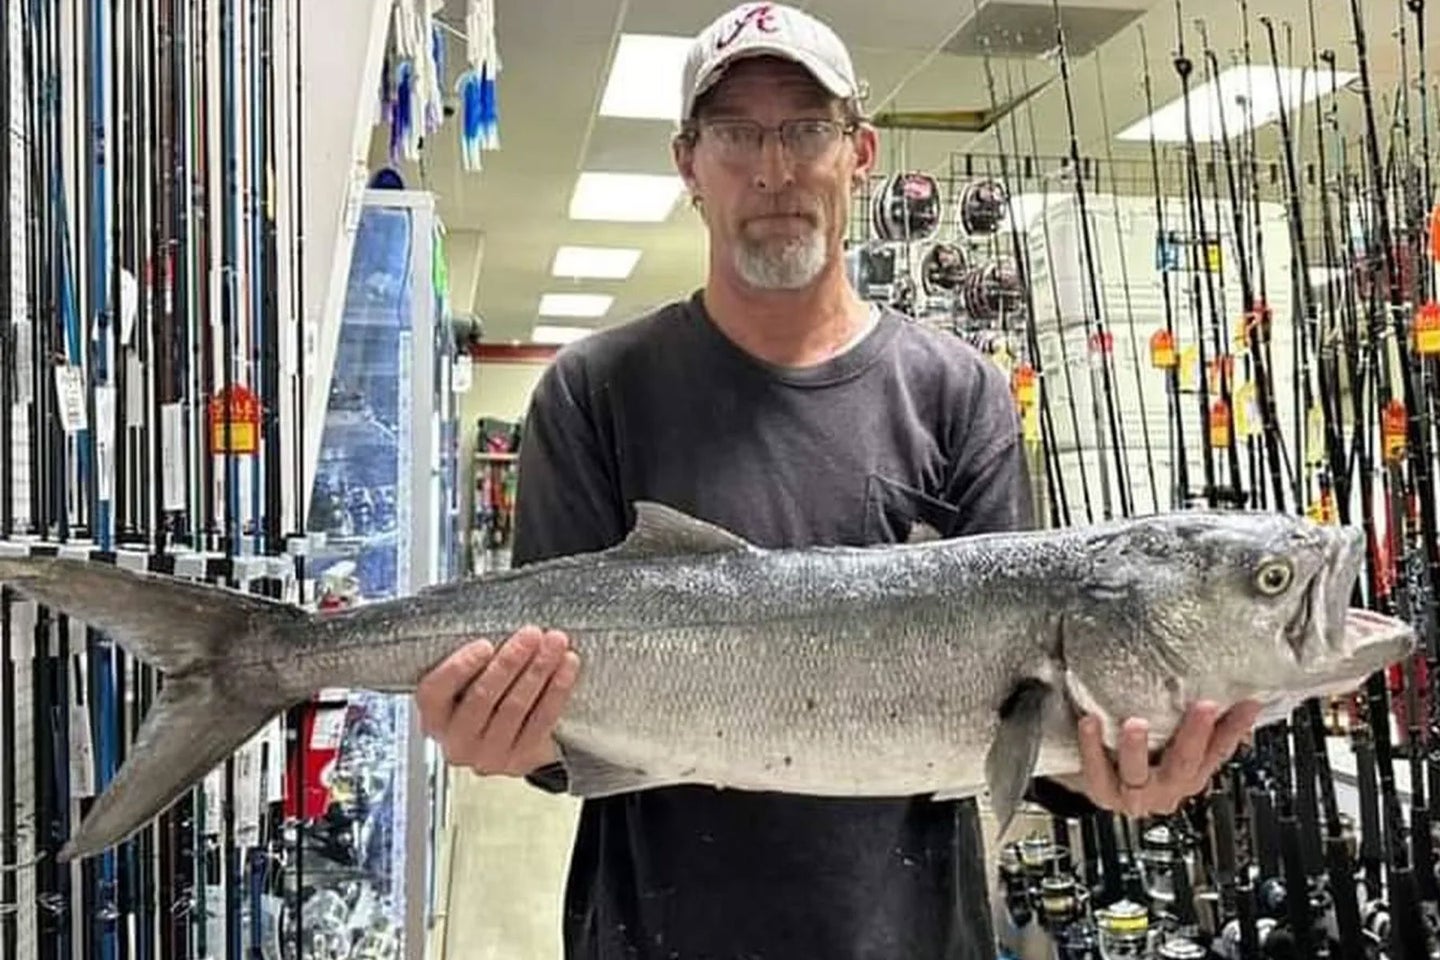 An angler poses with a state record bluefish.